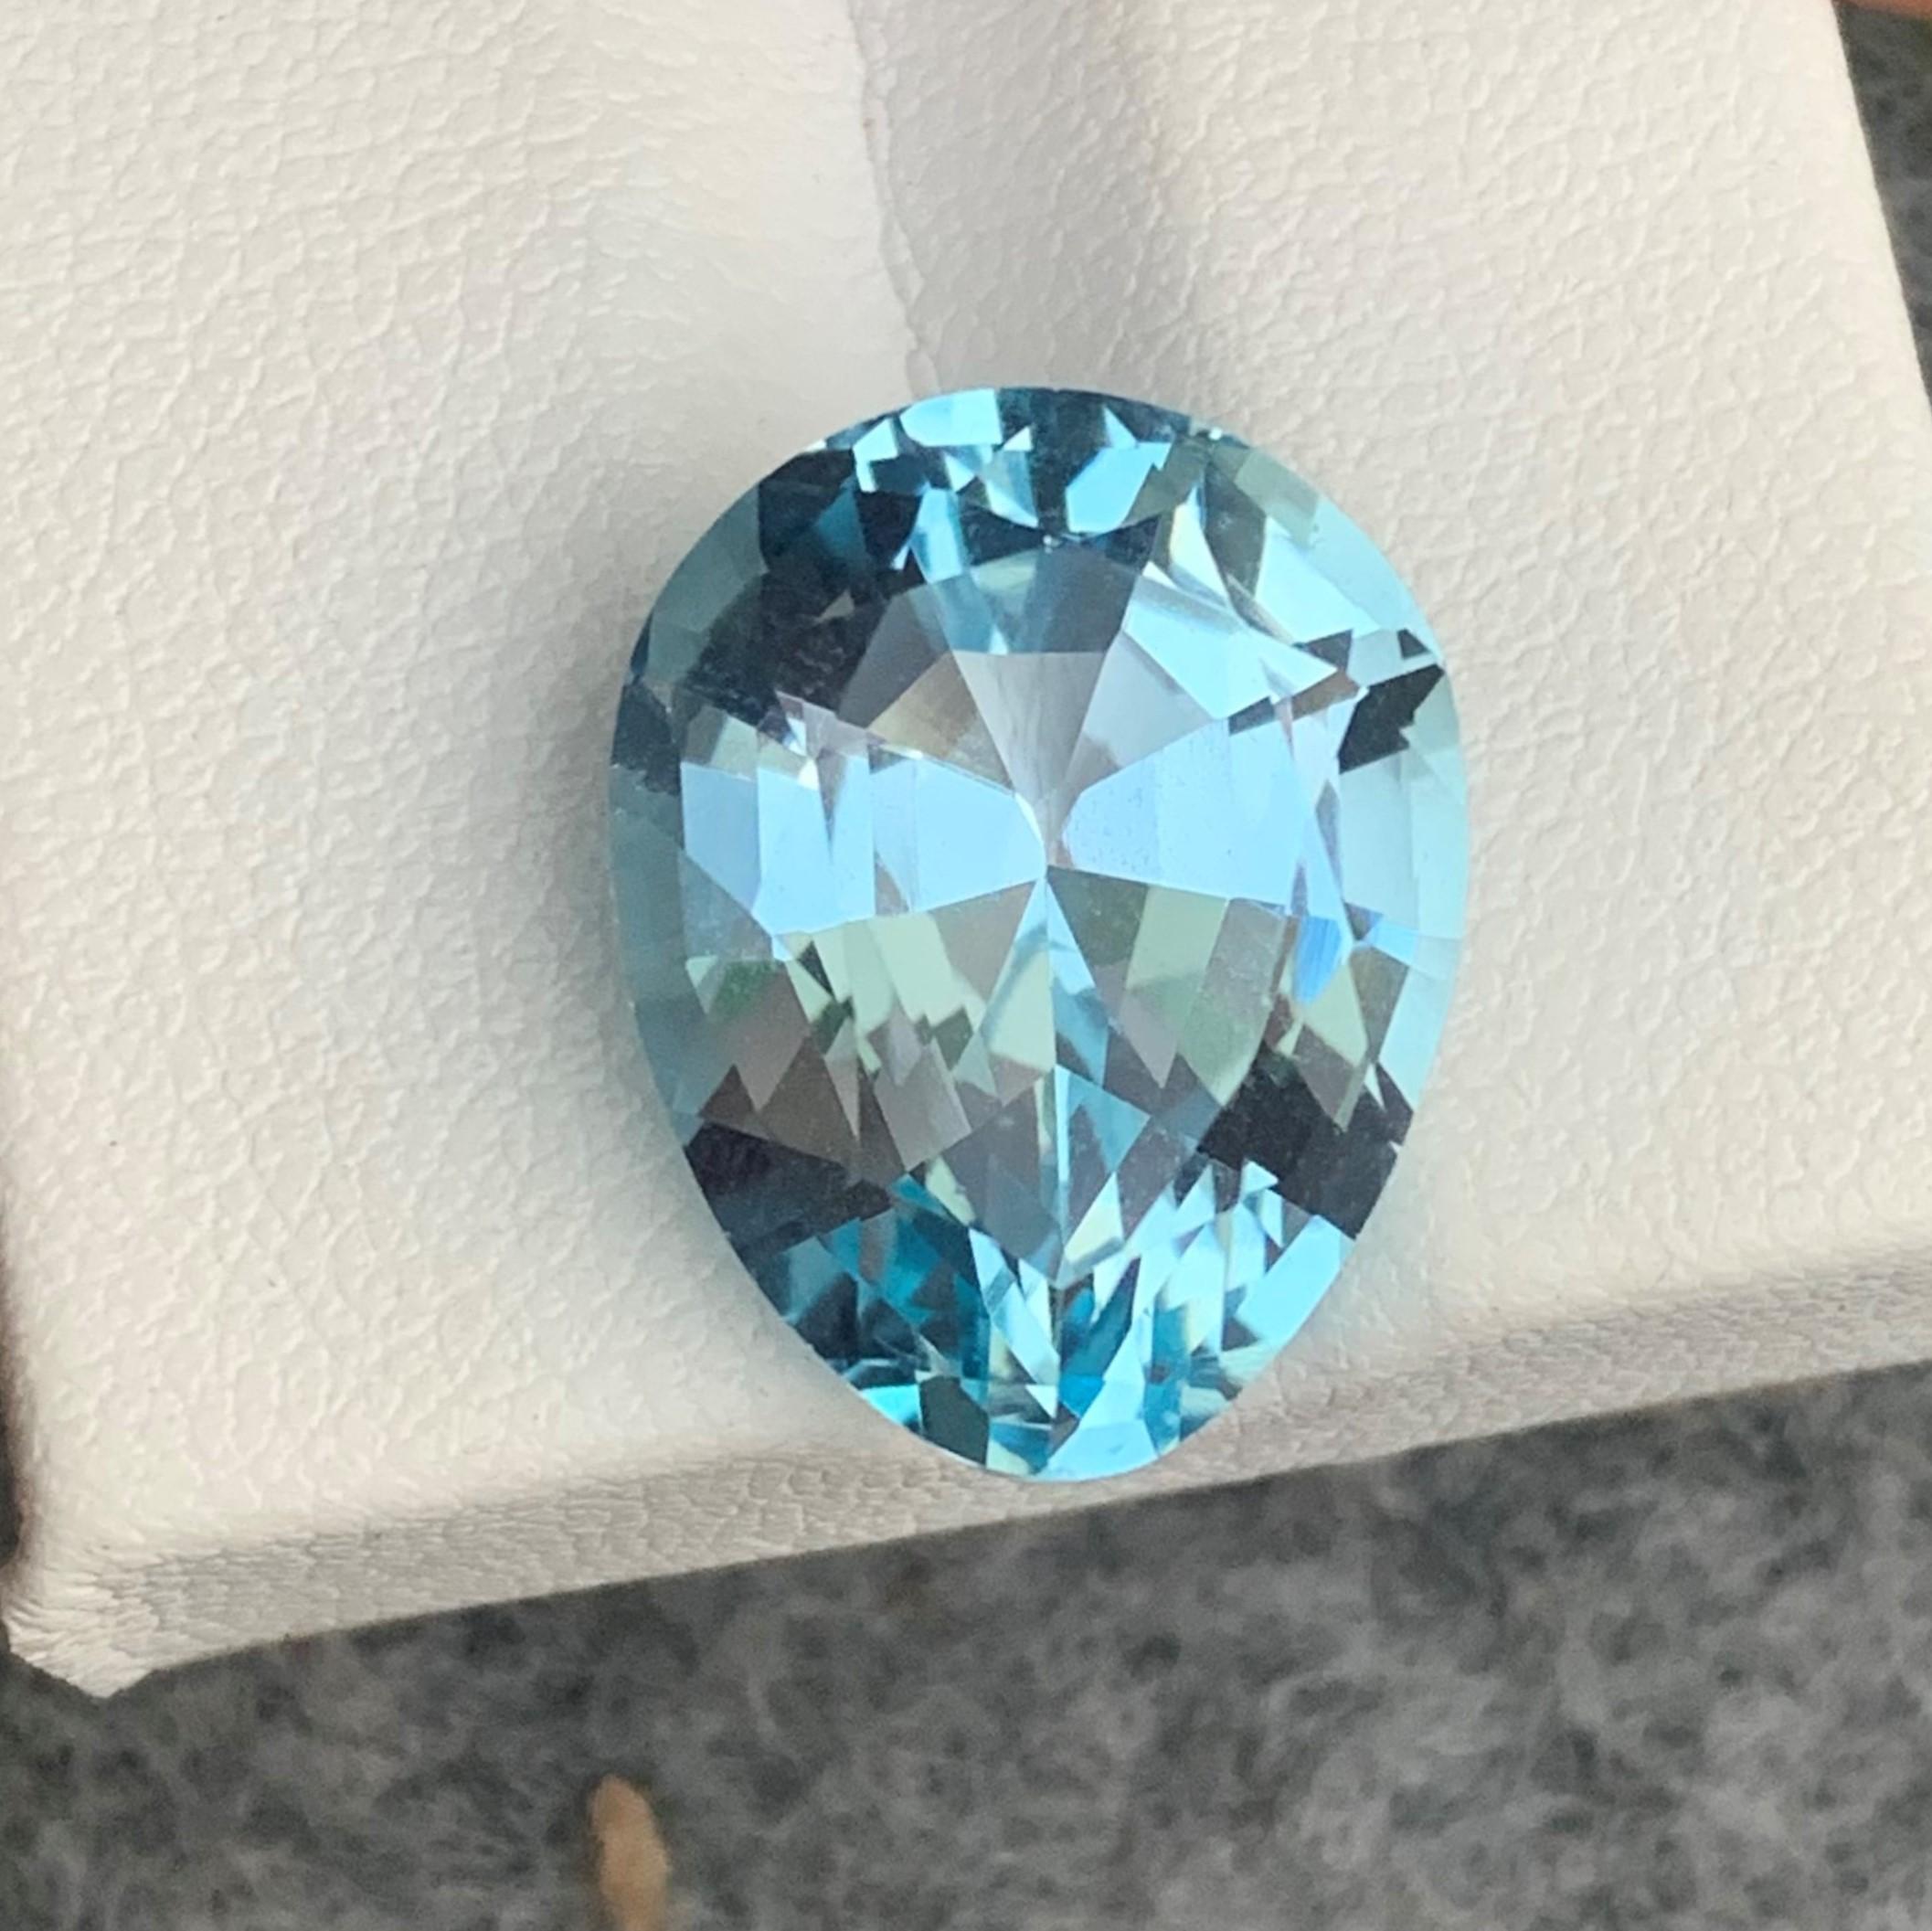 Faceted Sky Blue Topaz 
Weight : 14.40 Carats
Dimensions : 16.8x13.3x9.2 Mm
Origin : Brazil
Clarity : Eye Clean
Shape: Pear
Cut/Facet: Cushion Pear
Color: Light Blue
Certificate: On Demand
Blue Topaz Metaphysical Properties
Blue topaz, in